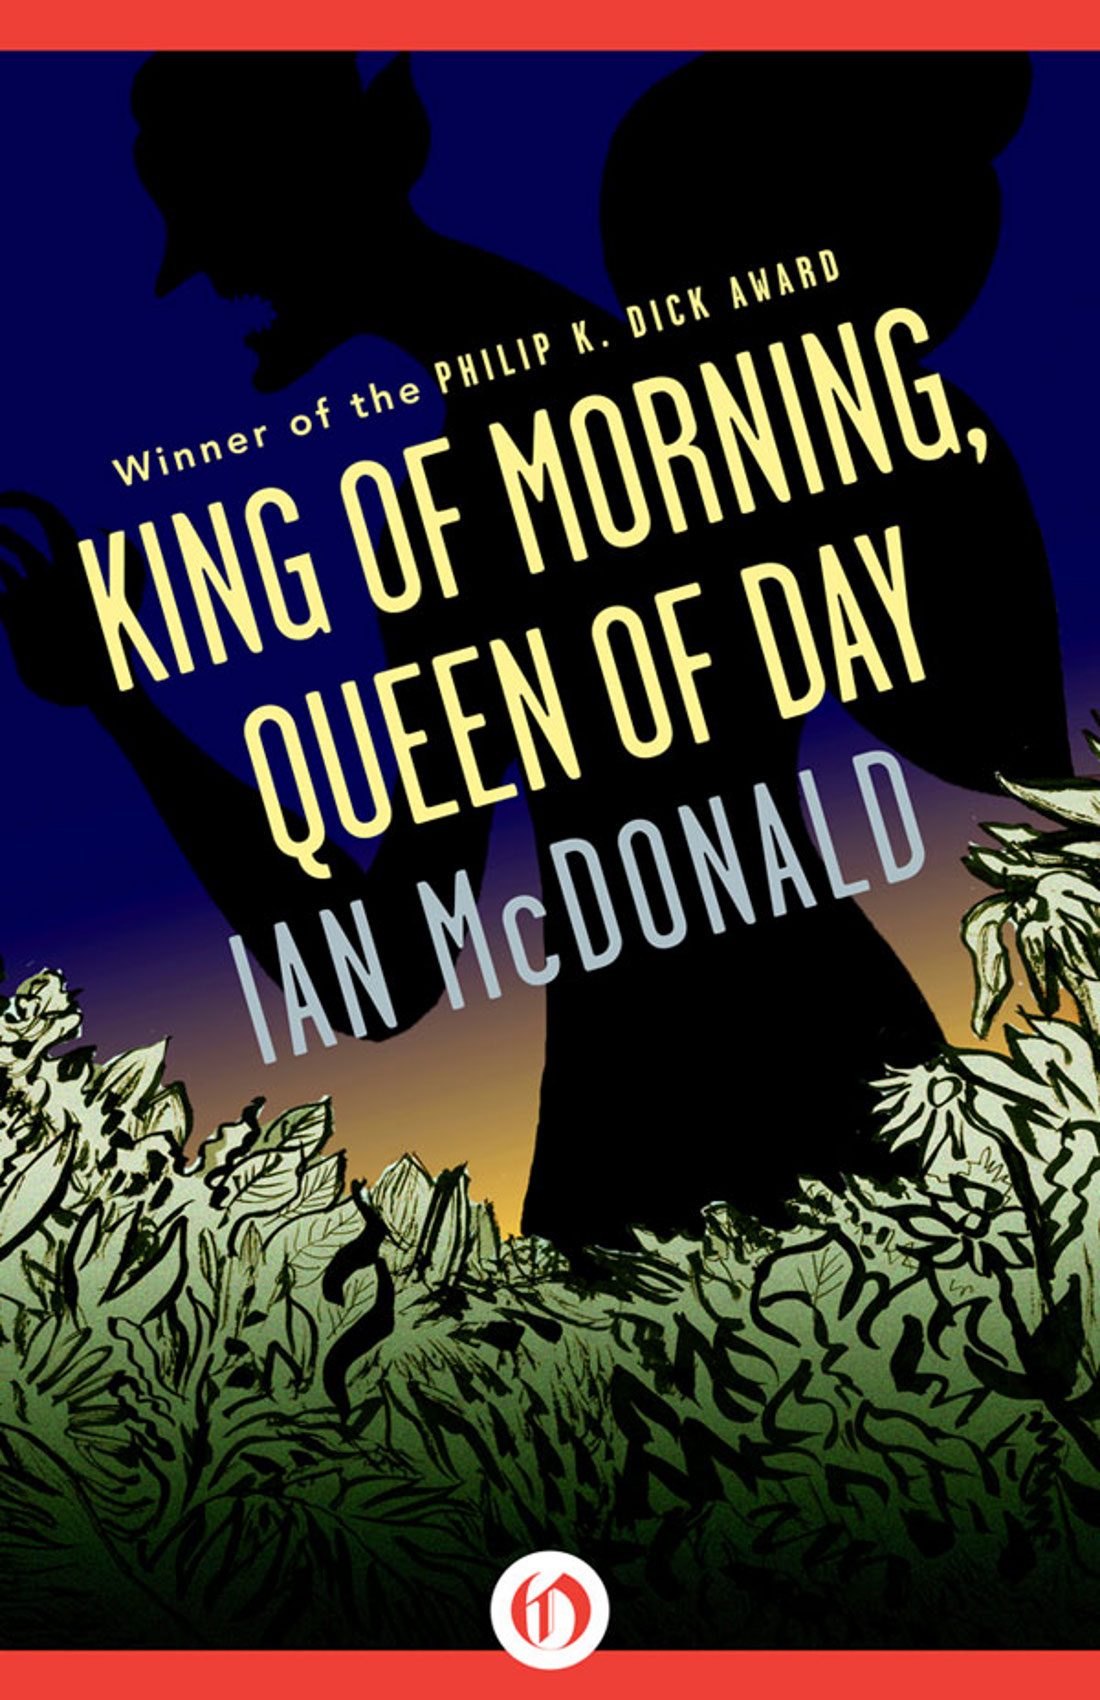 King of Morning, Queen of Day by Ian McDonald